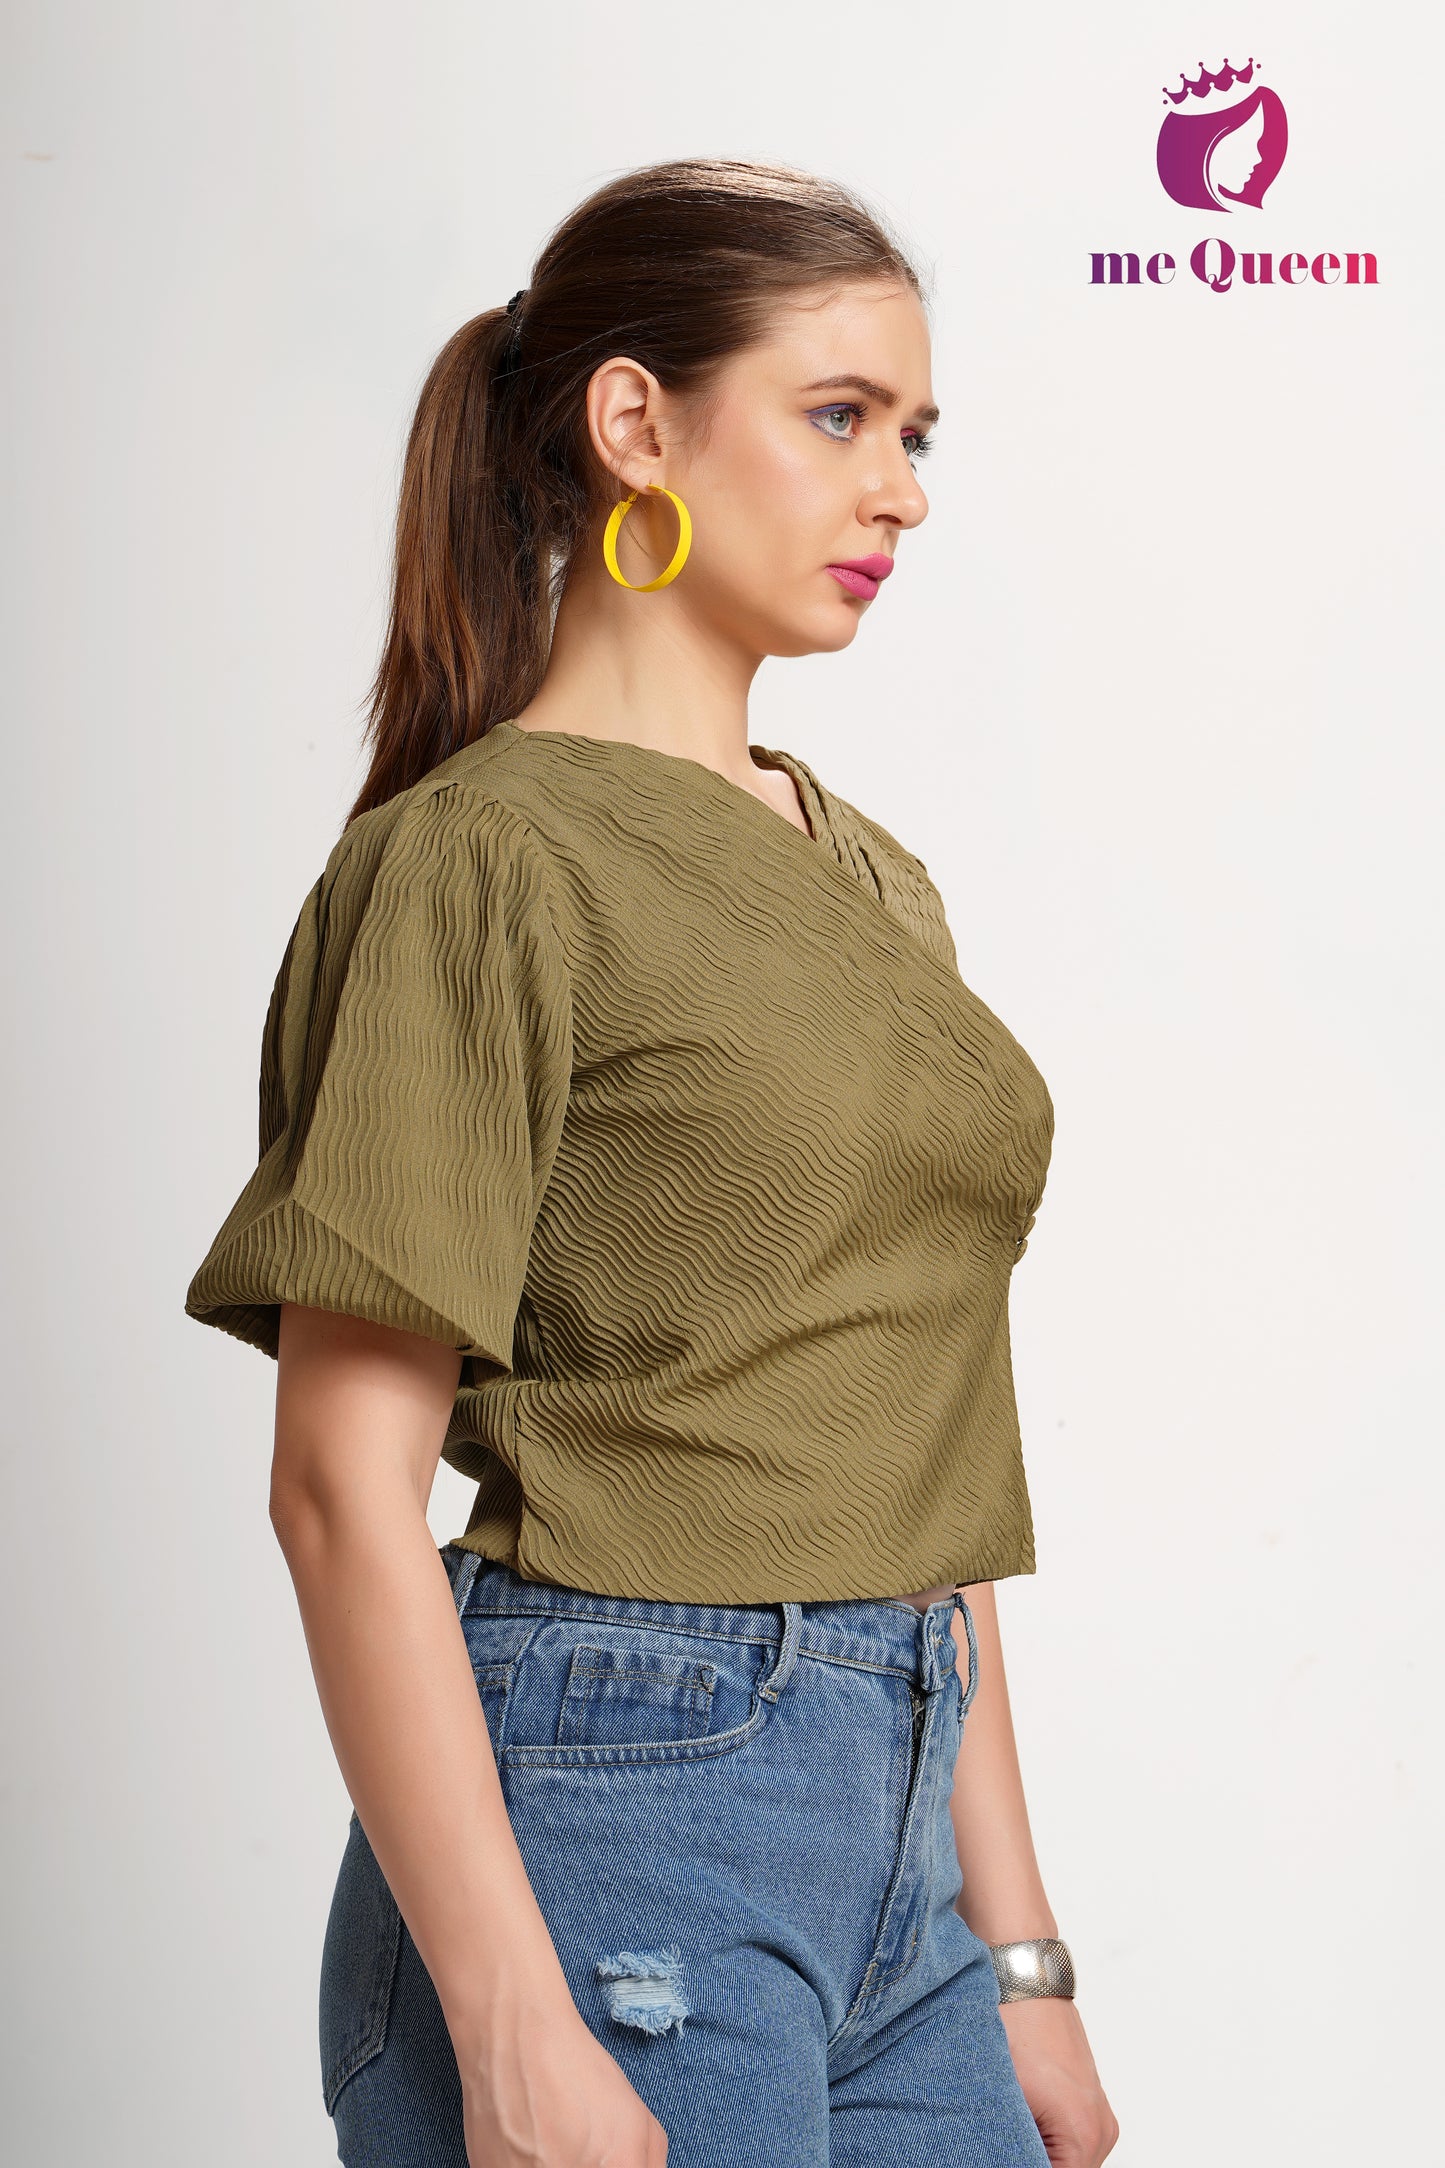 MeQueen's Women's Stylish Pattern Dark Olive Brown Top with Puff Sleeves